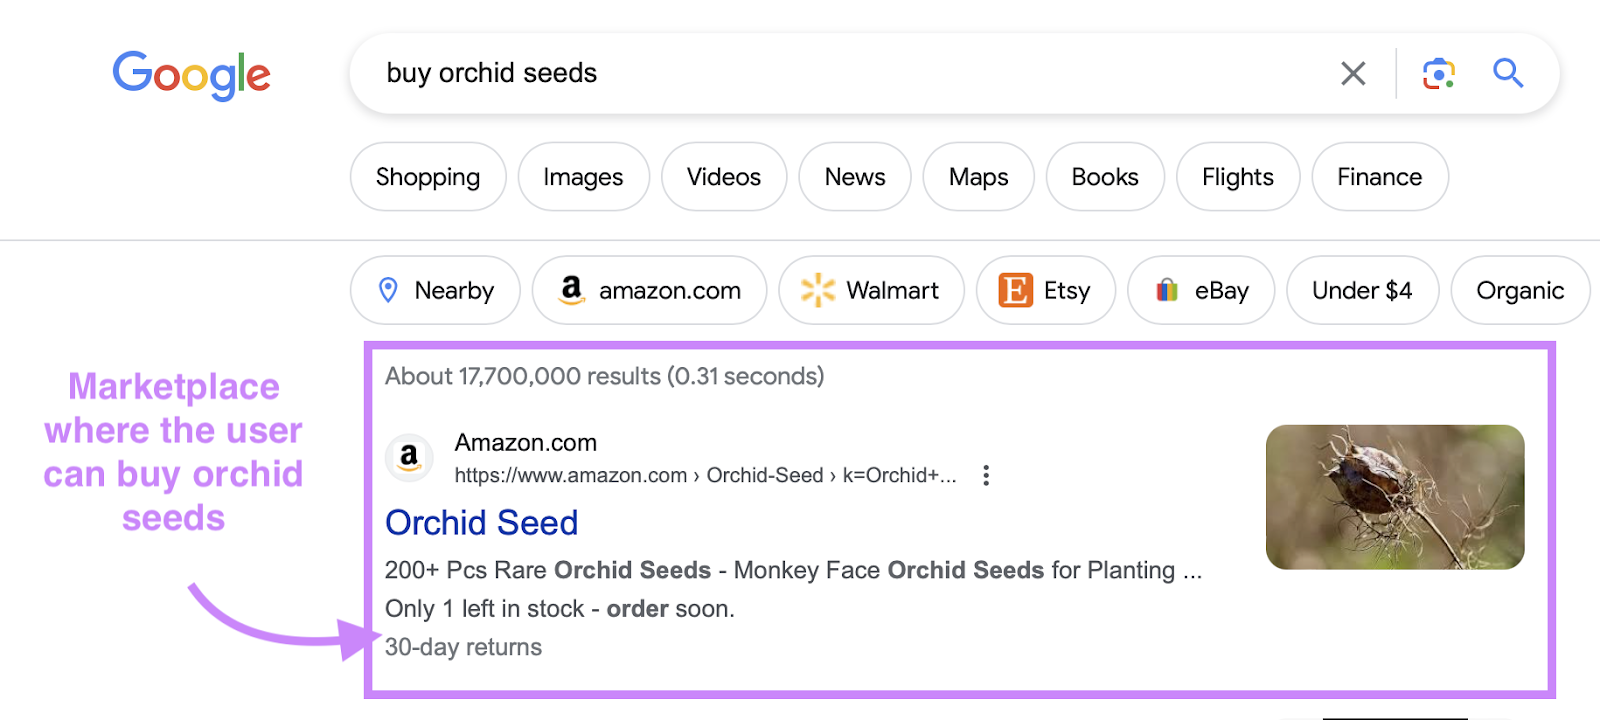 Google search for “buy orchid seeds”